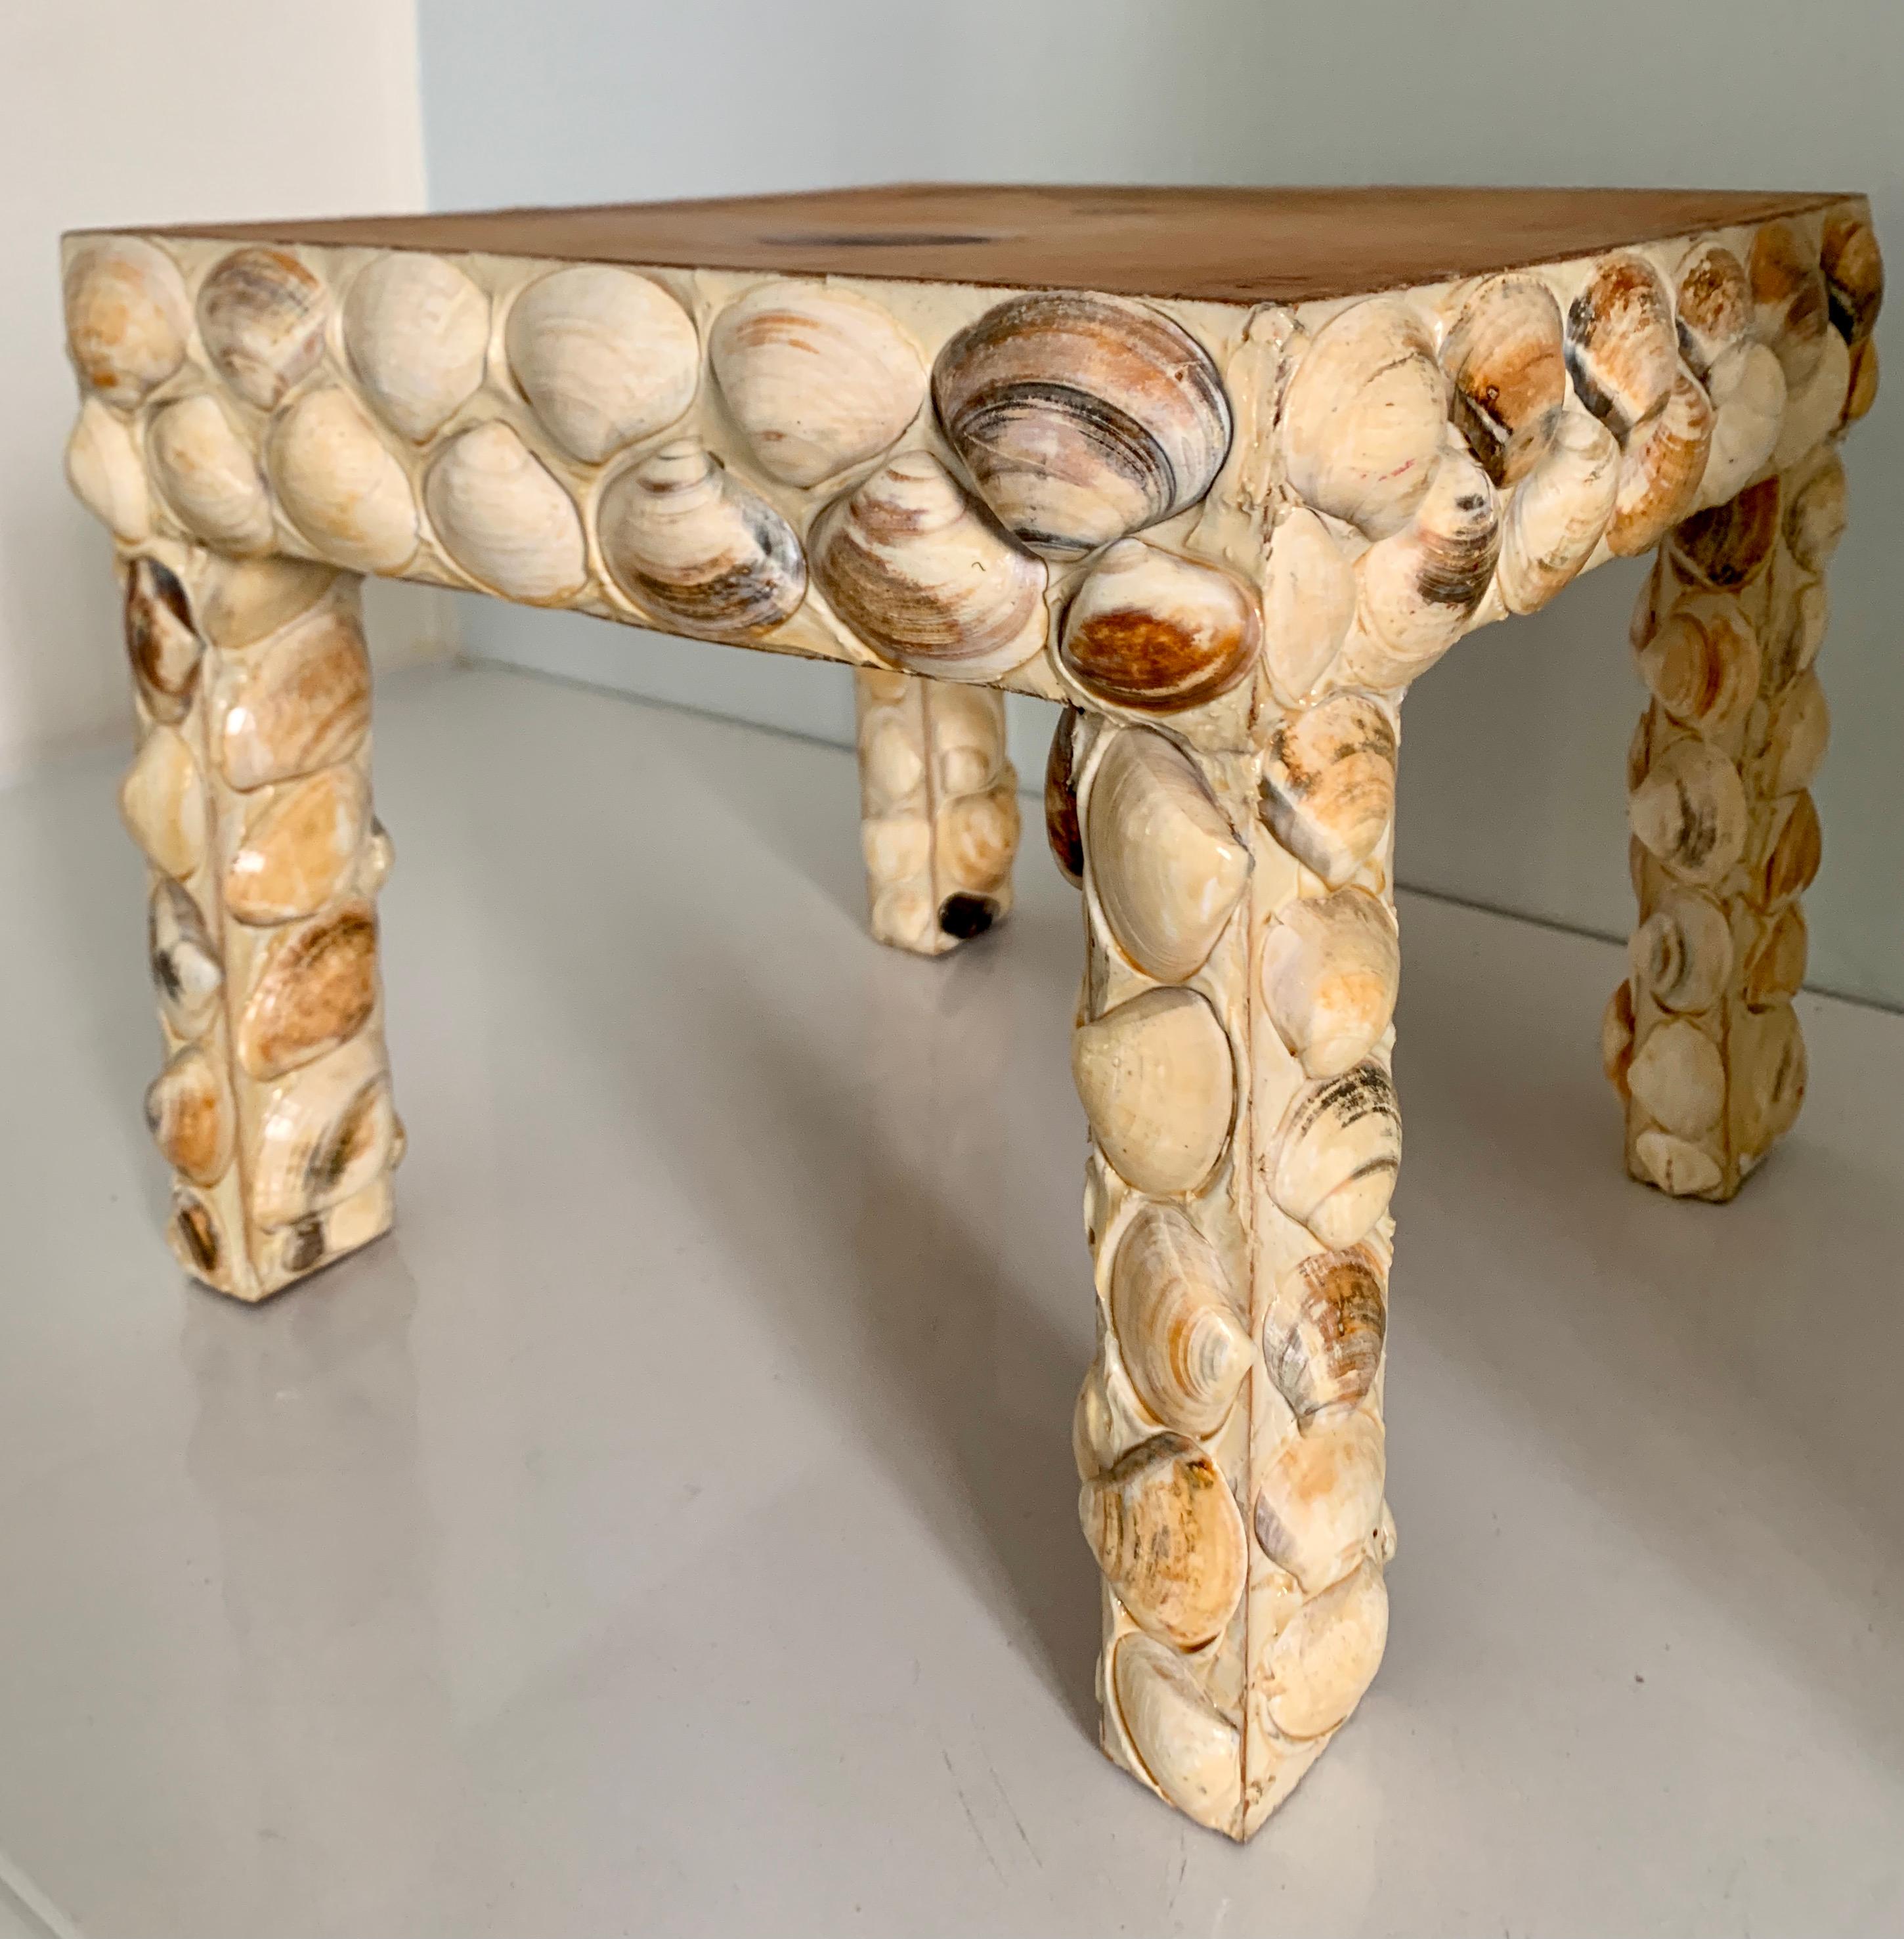 20th Century Folk Art Grotto or Cockle Shell Side Table